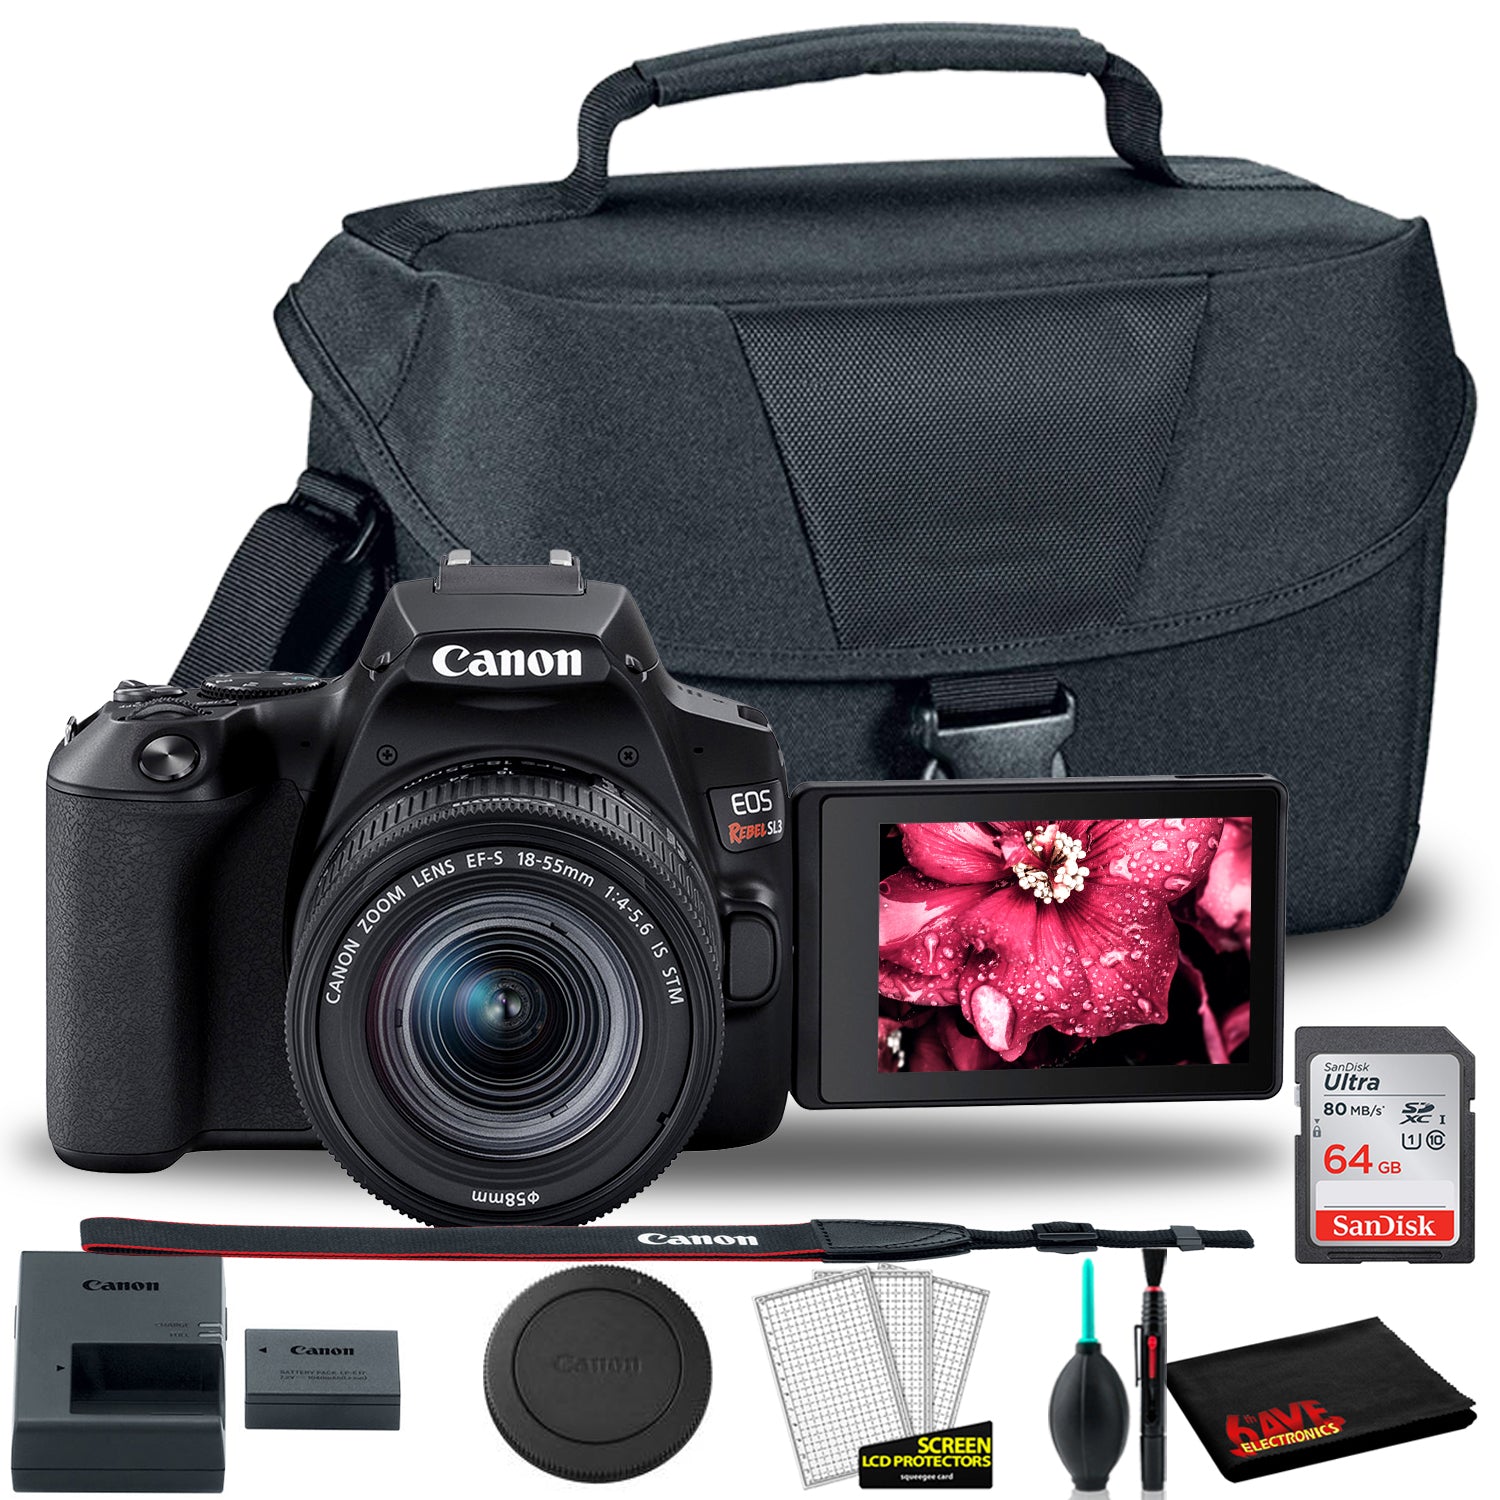 Canon EOS Rebel 250D/SL3 DSLR Camera with 18-55mm Lens (Black) + Canon EOS Bag + Sandisk Ultra 64GB Card + Cleaning Set and More